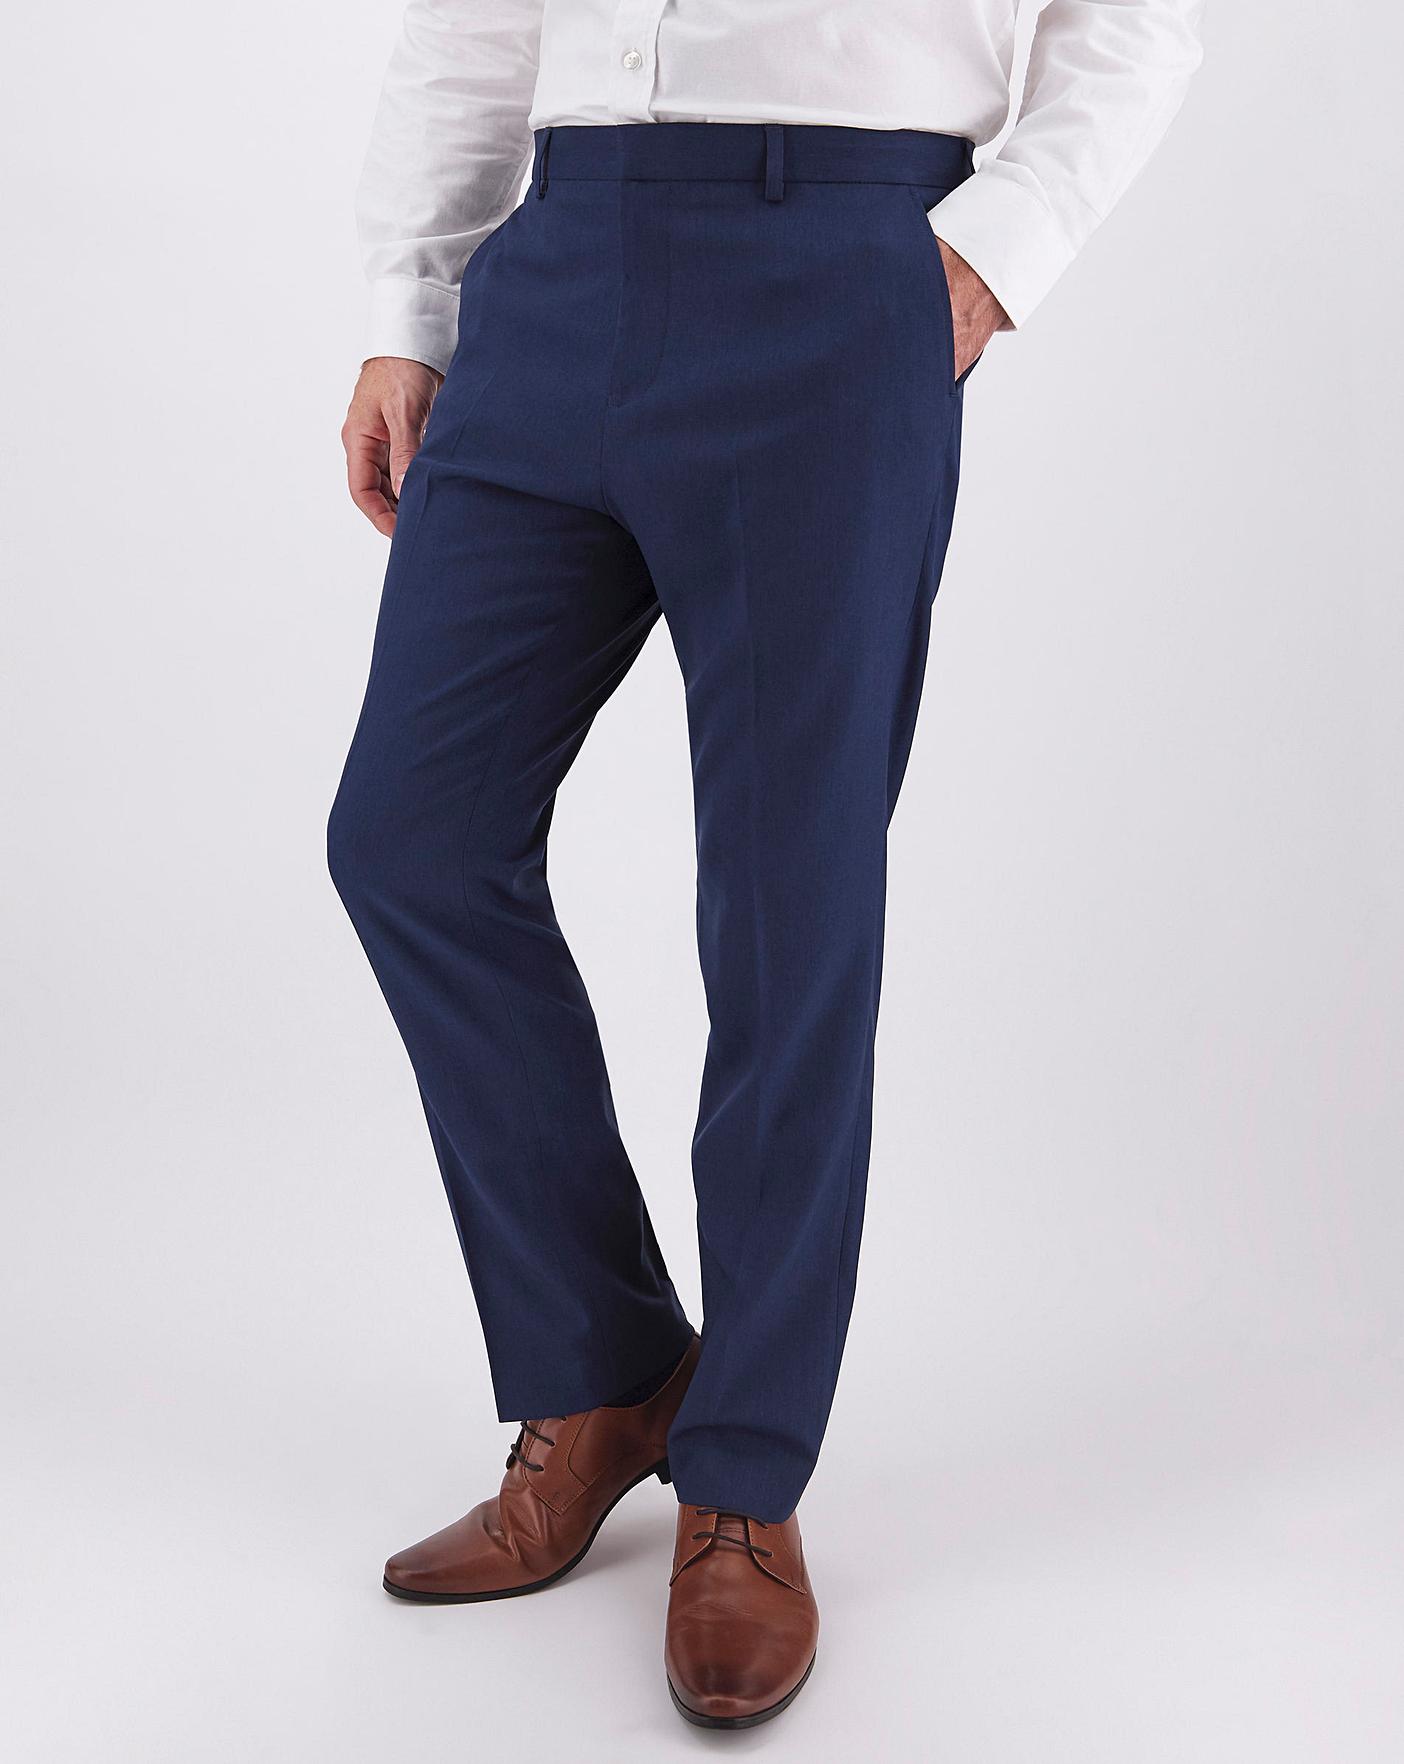 Buy Solid Formal Trousers with Pockets | Splash KSA